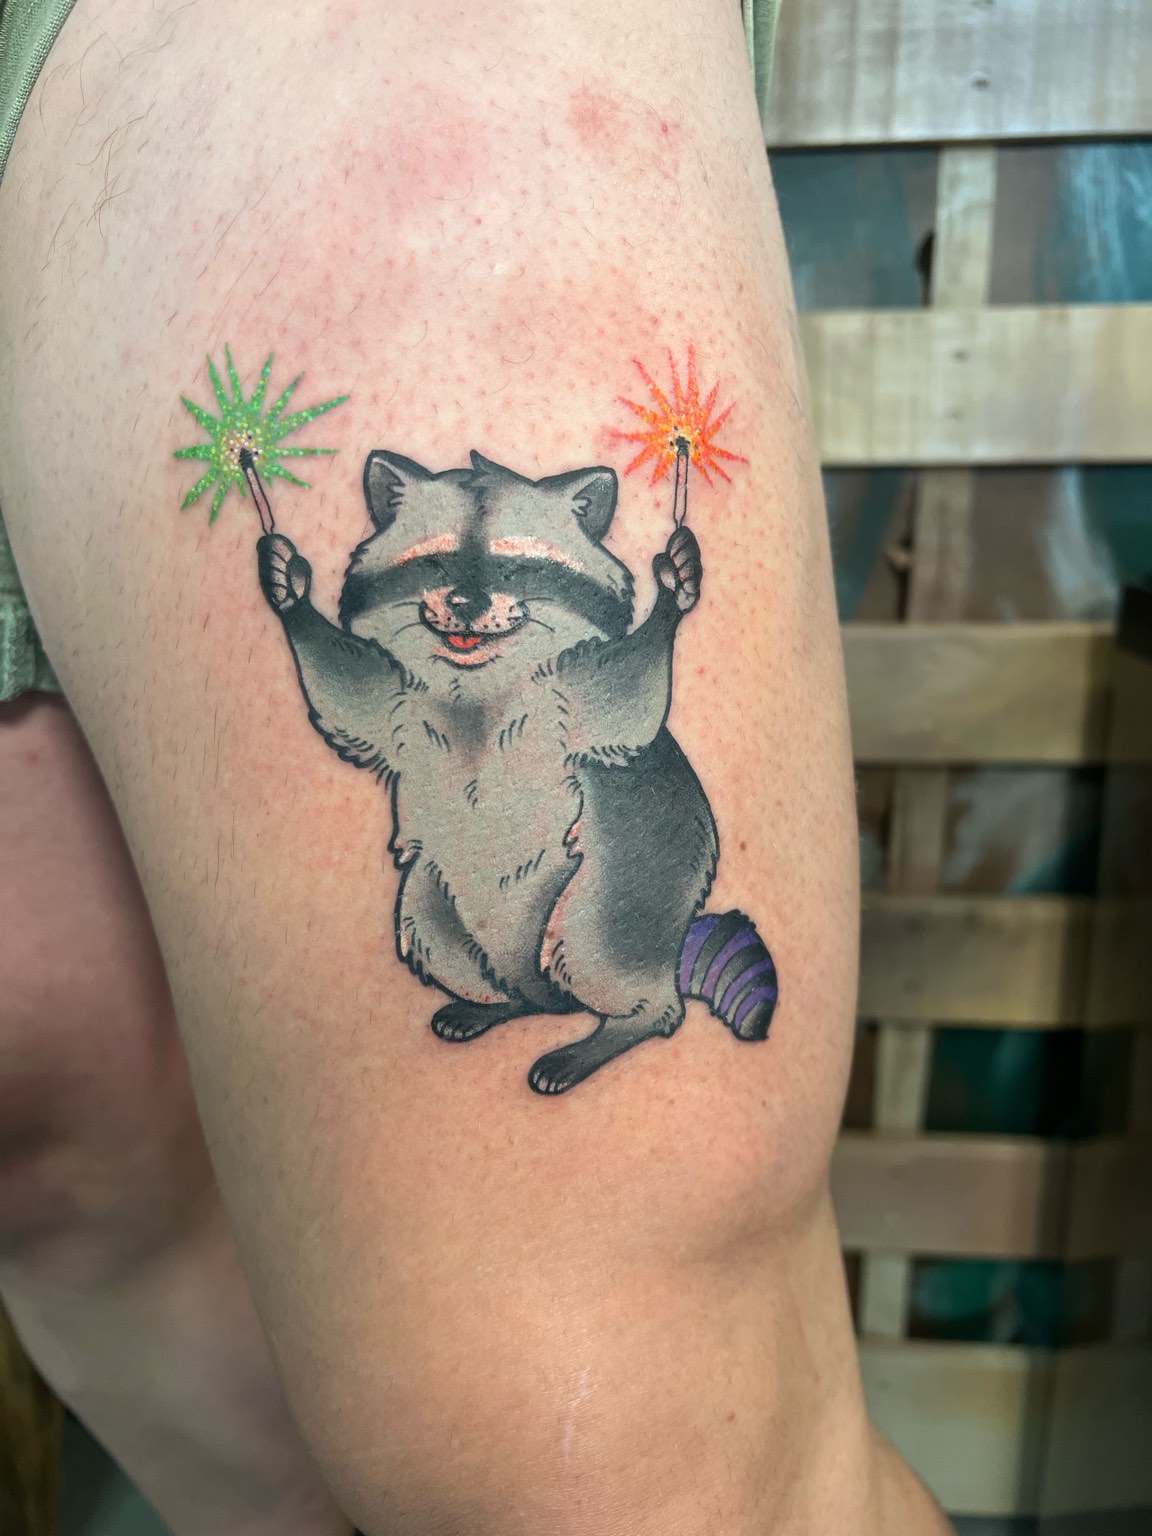 Professional Tattooing by Brynn  Sneaky AF donutthieving trash pandas  for Jammie